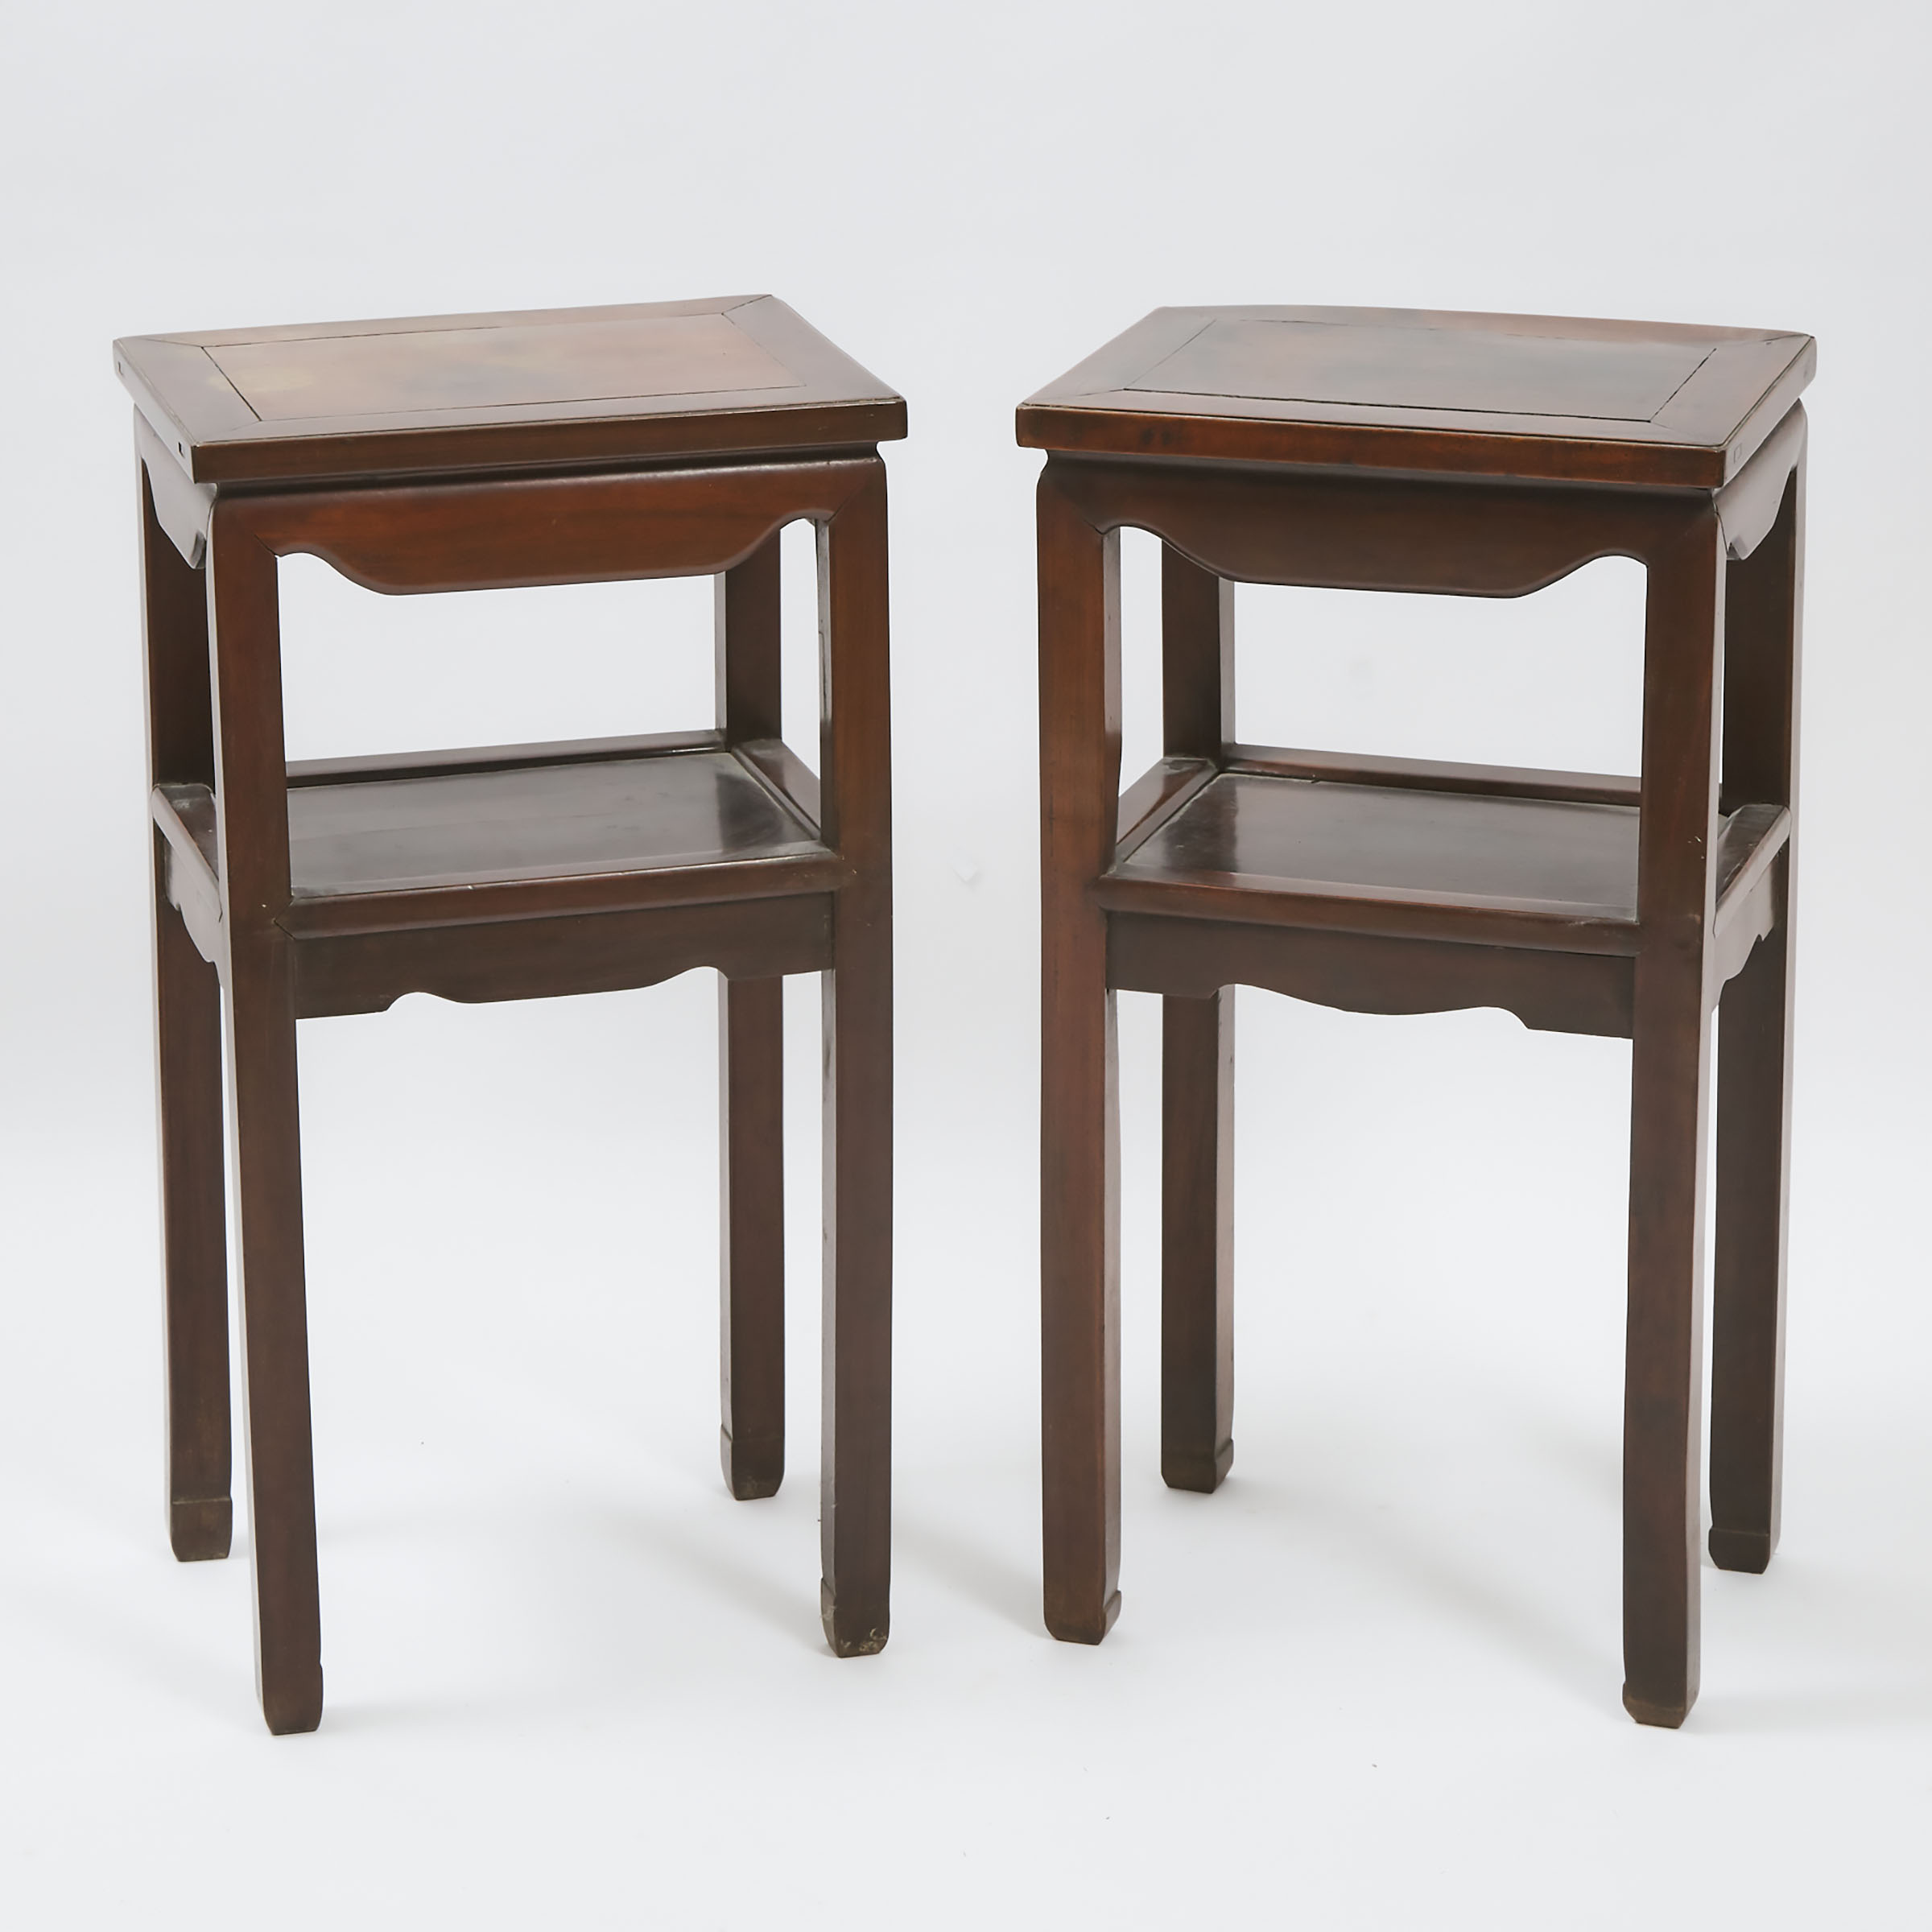 A Pair of Rosewood Side Tables, Mid 20th Century